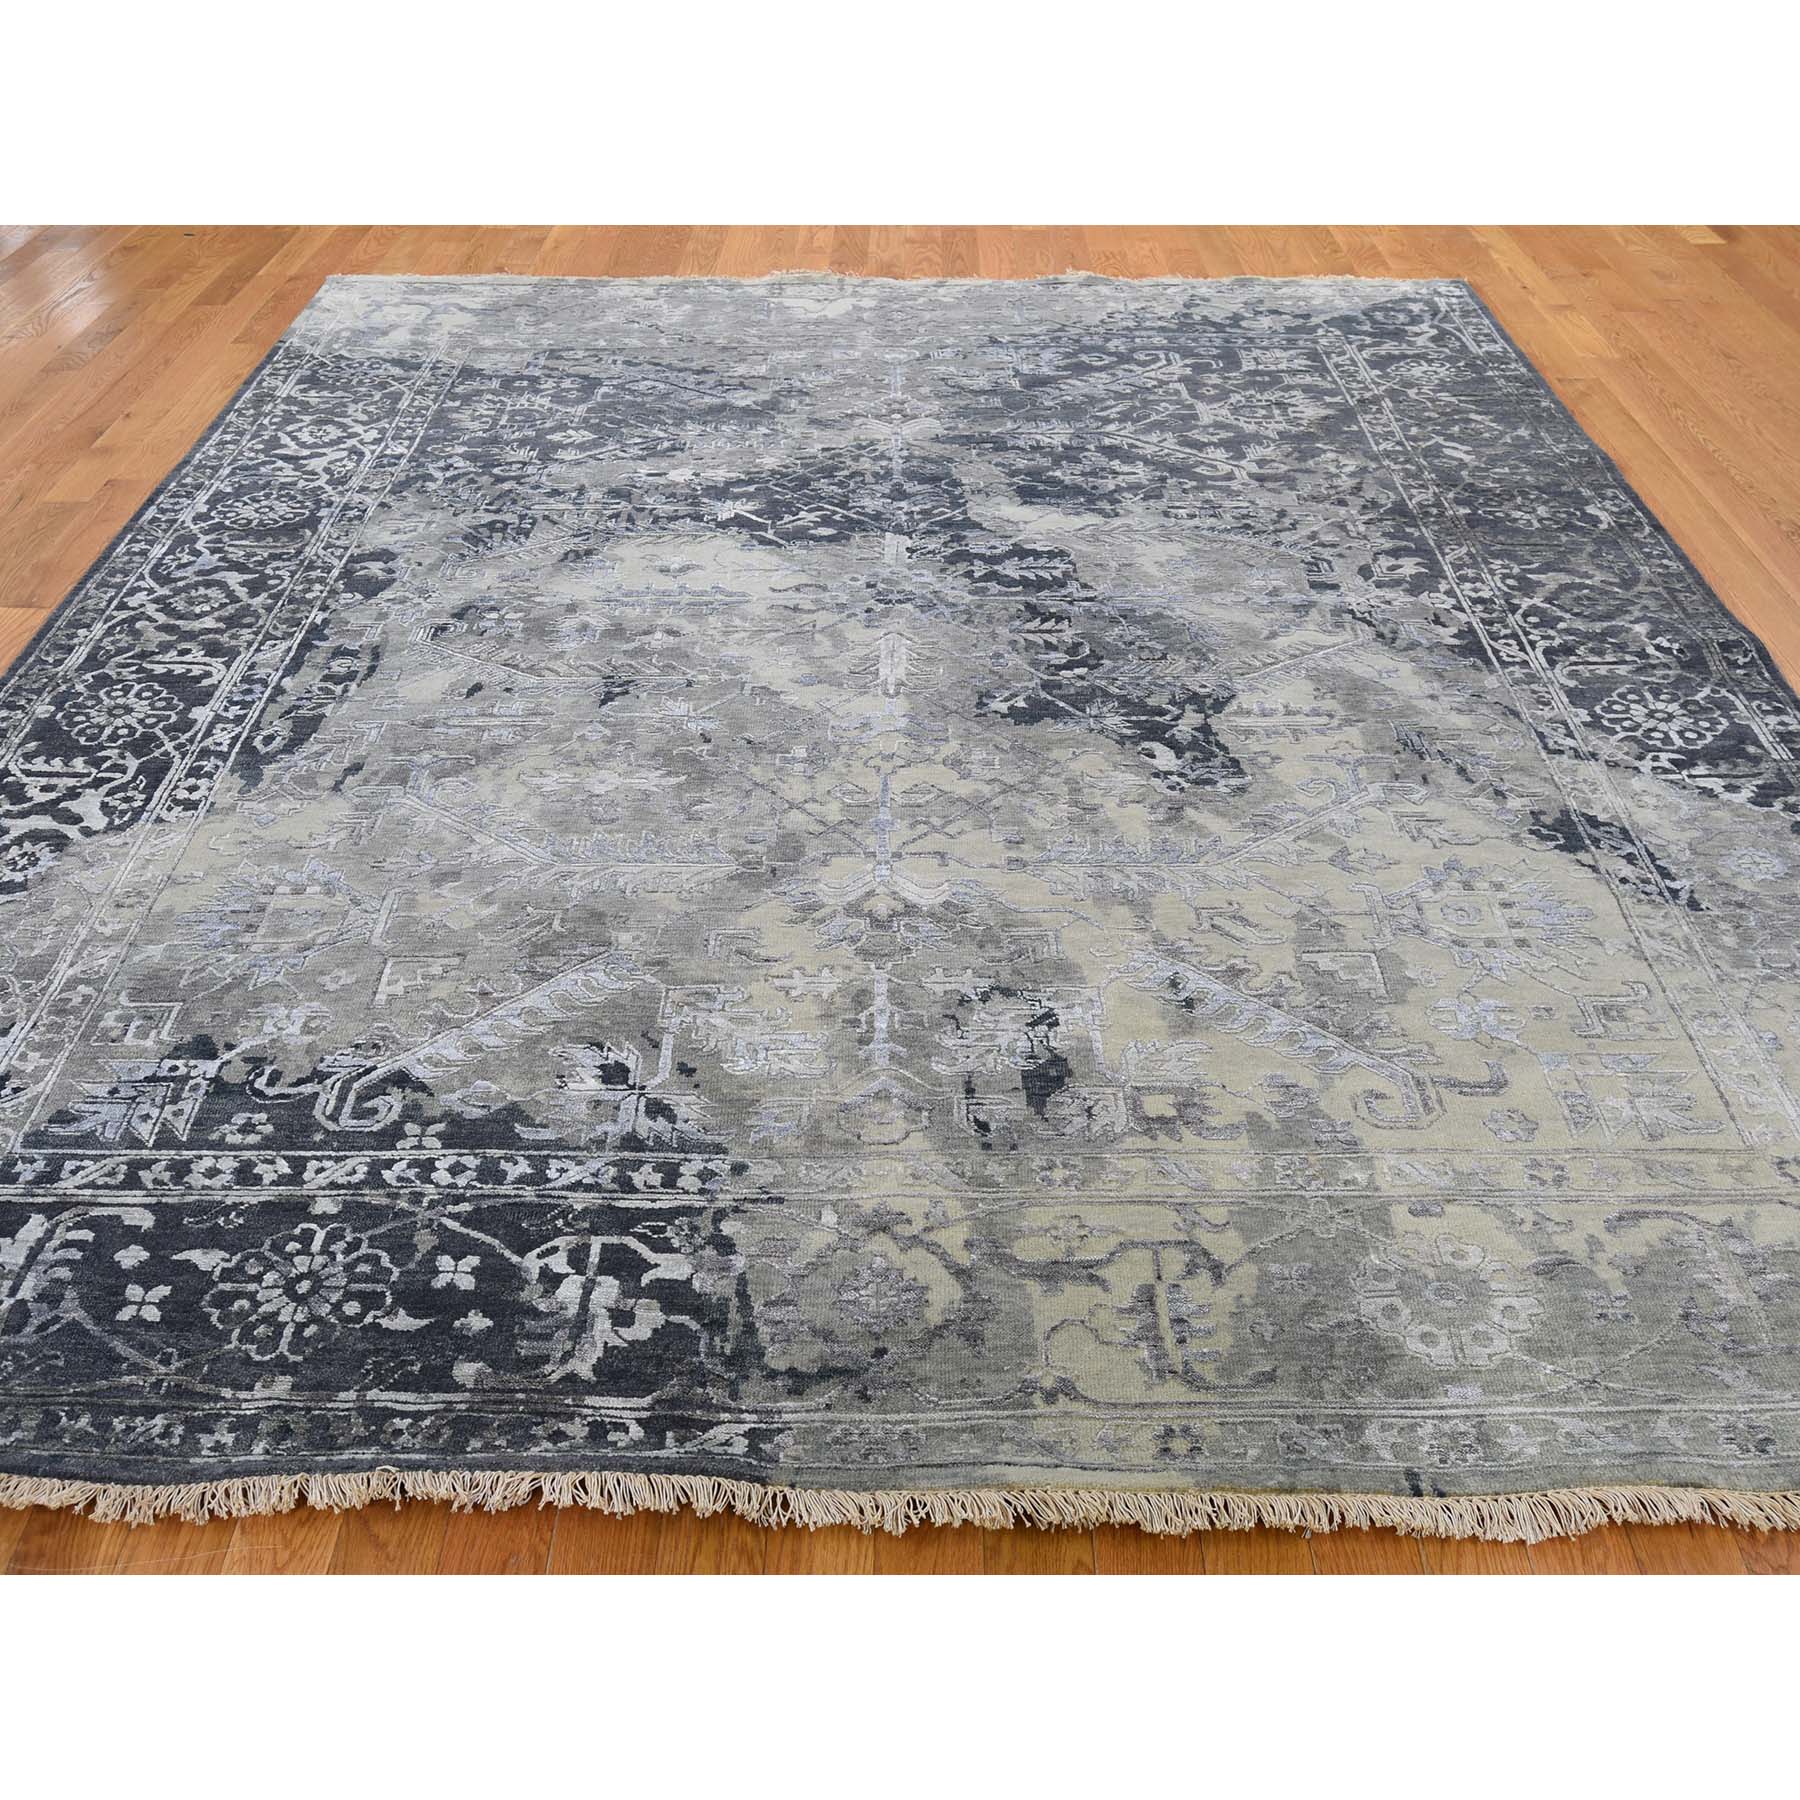 8-x10- All Over Design Broken Persian Heriz Wool And Silk Hand-Knotted Oriental Rug 